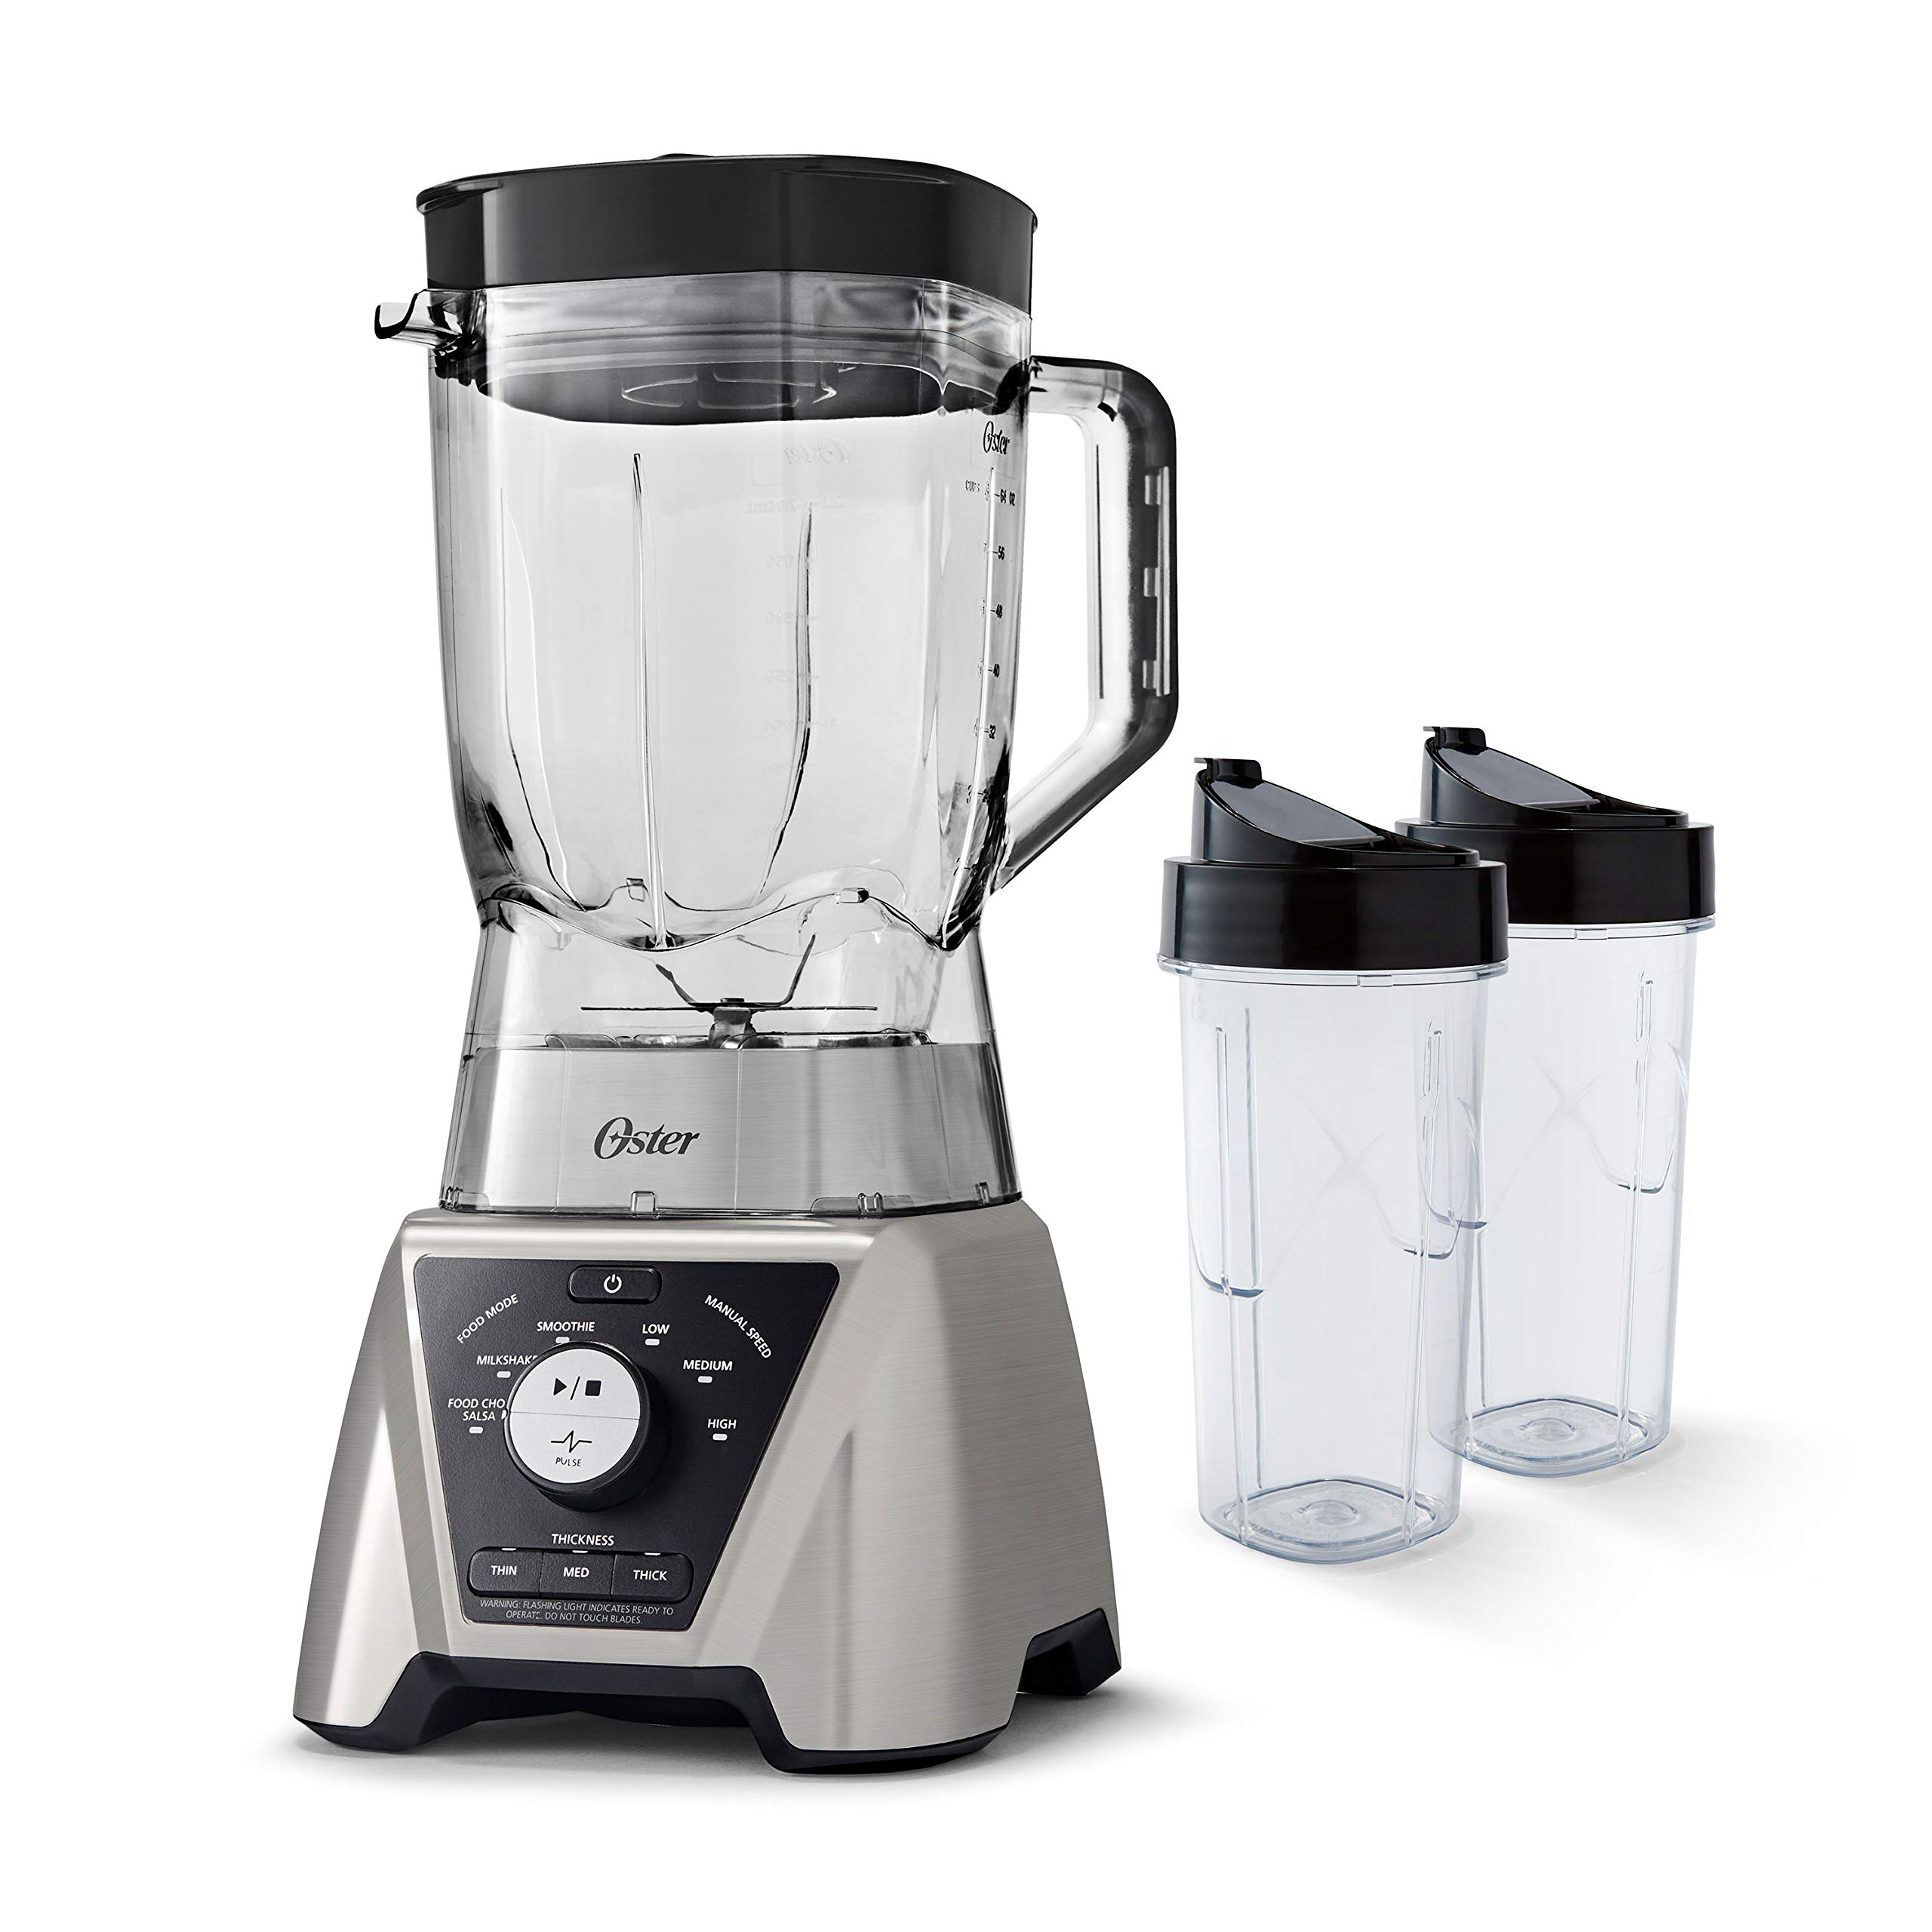 Oster Pro Blender with Texture Select Settings, 2 Blend-N-Go Cups and Tritan Jar, 64 Ounces, Brushed Nickel | Oster 2-Slice Toaster with Advanced Toast Technology, Stainless Steel